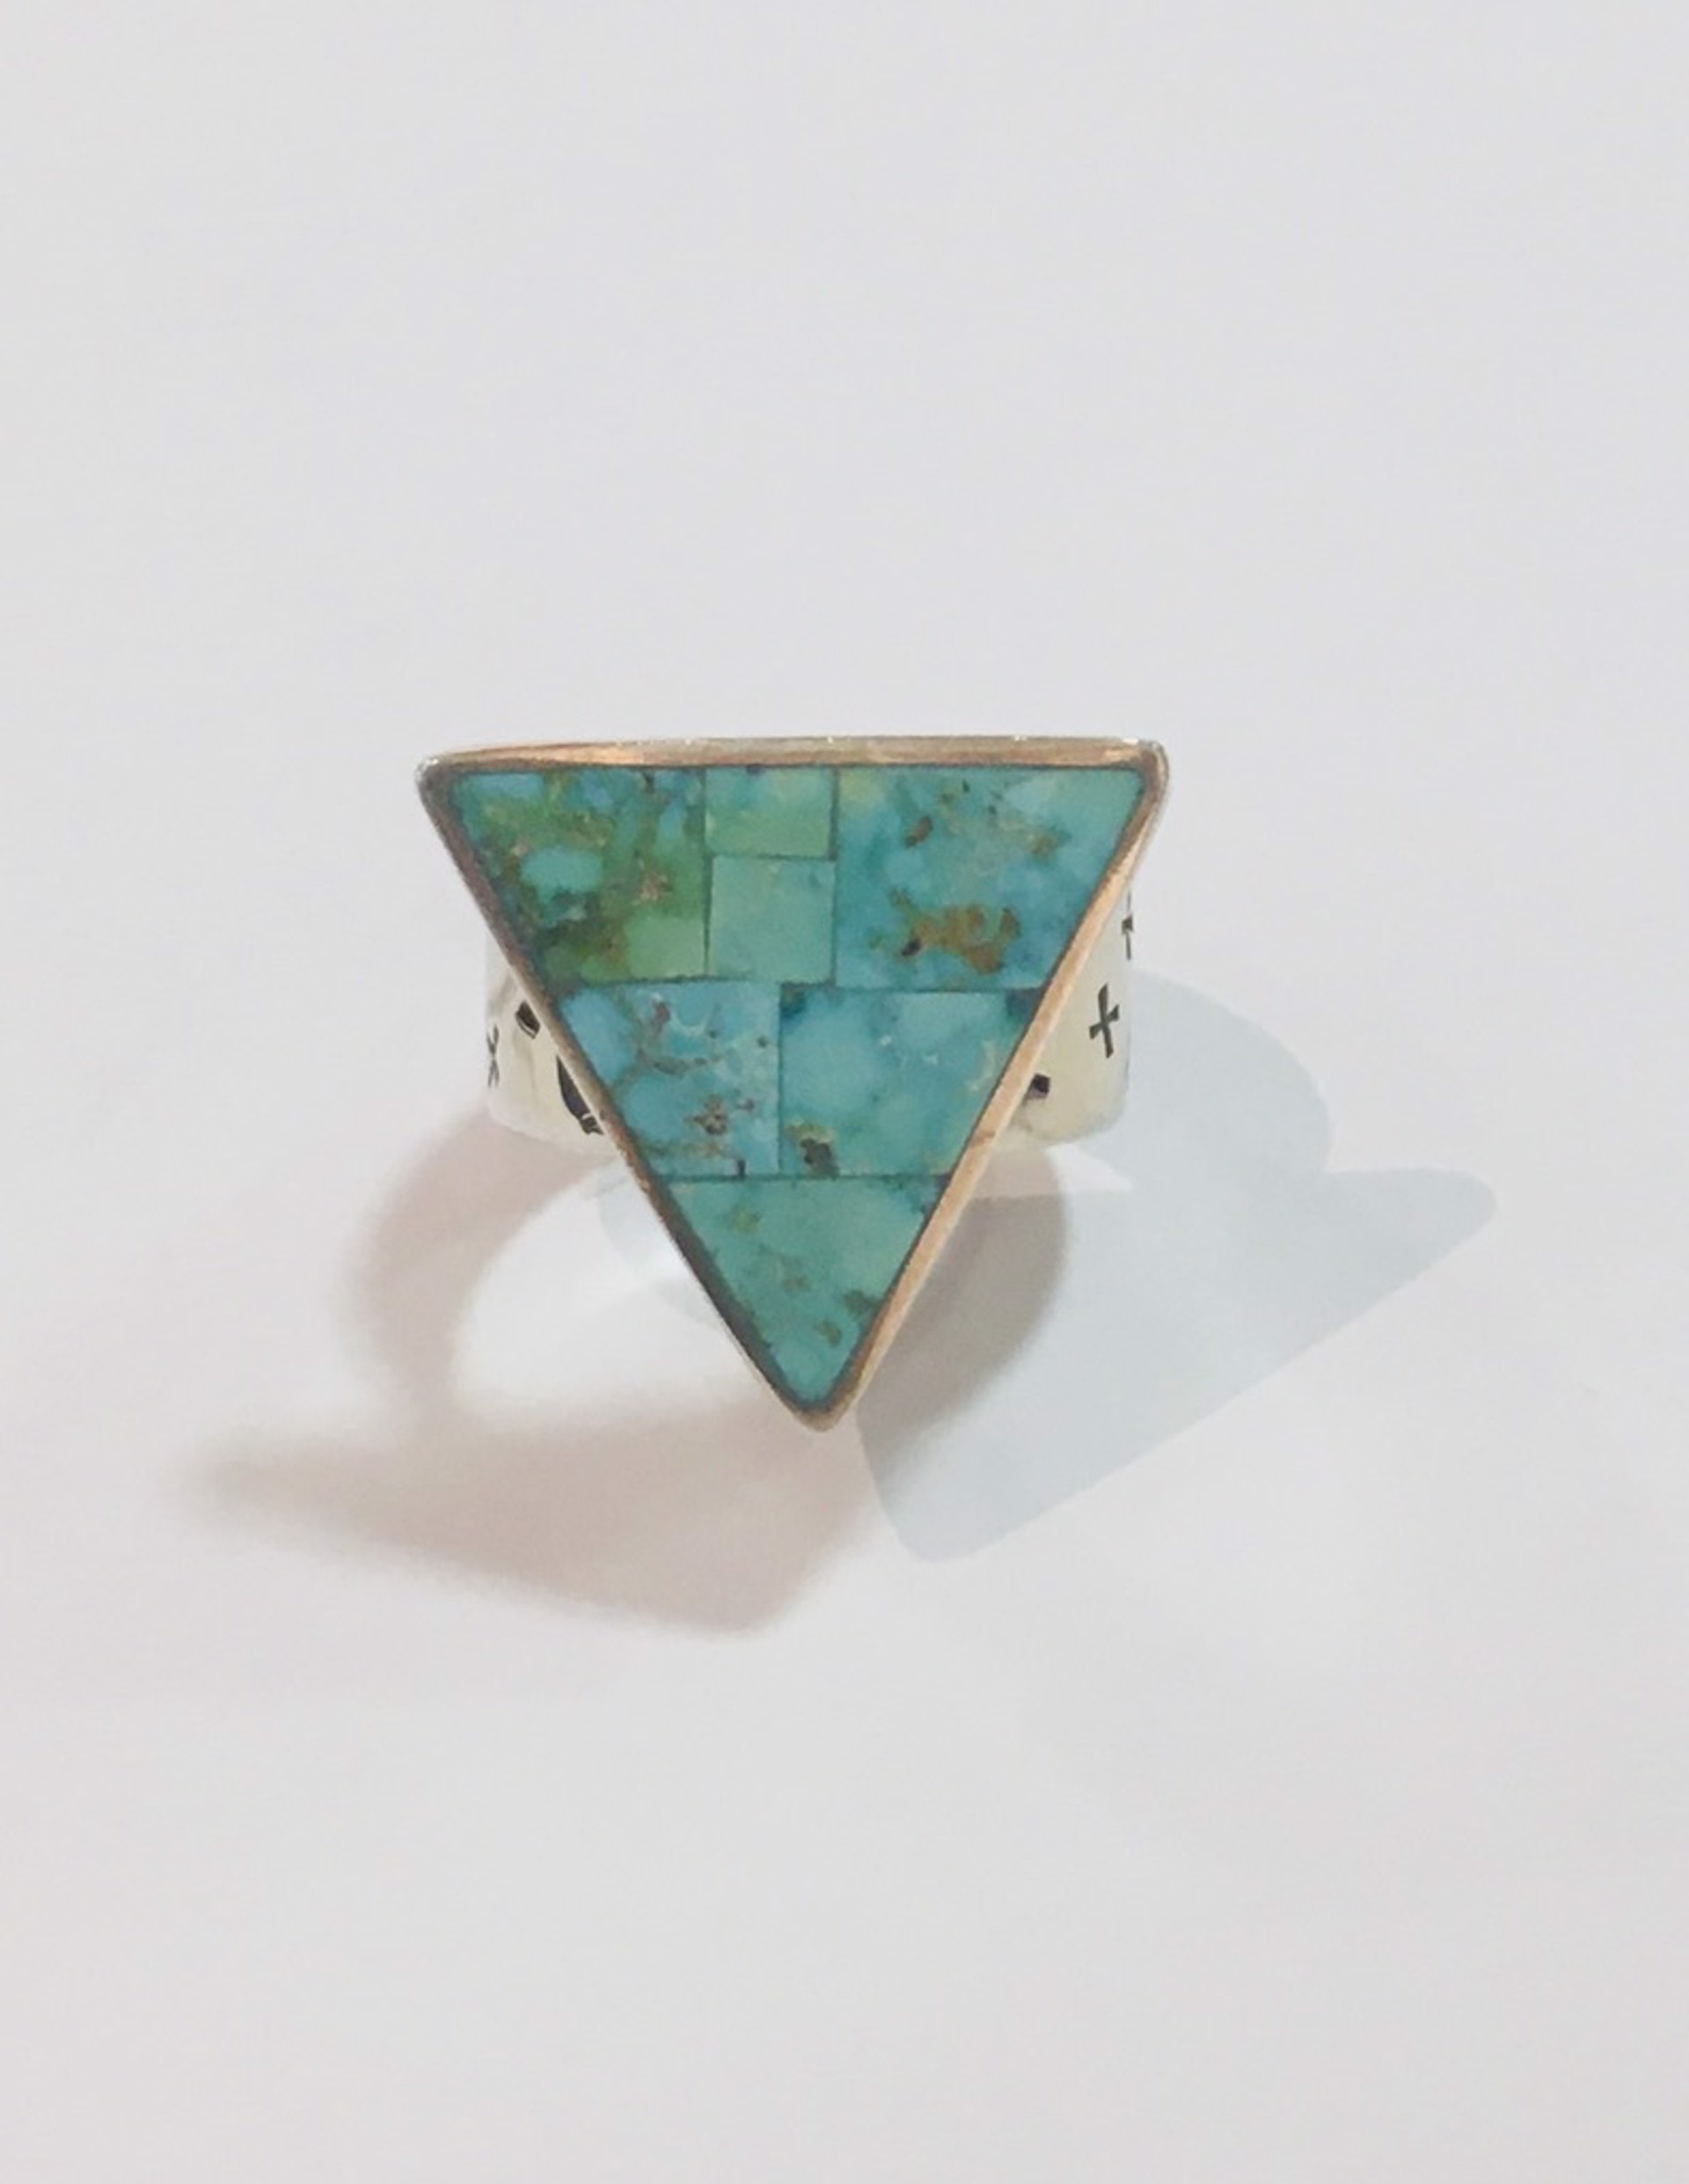 Triangle Turquoise Ring Size 6.15 by PHIL CHAMBLESS